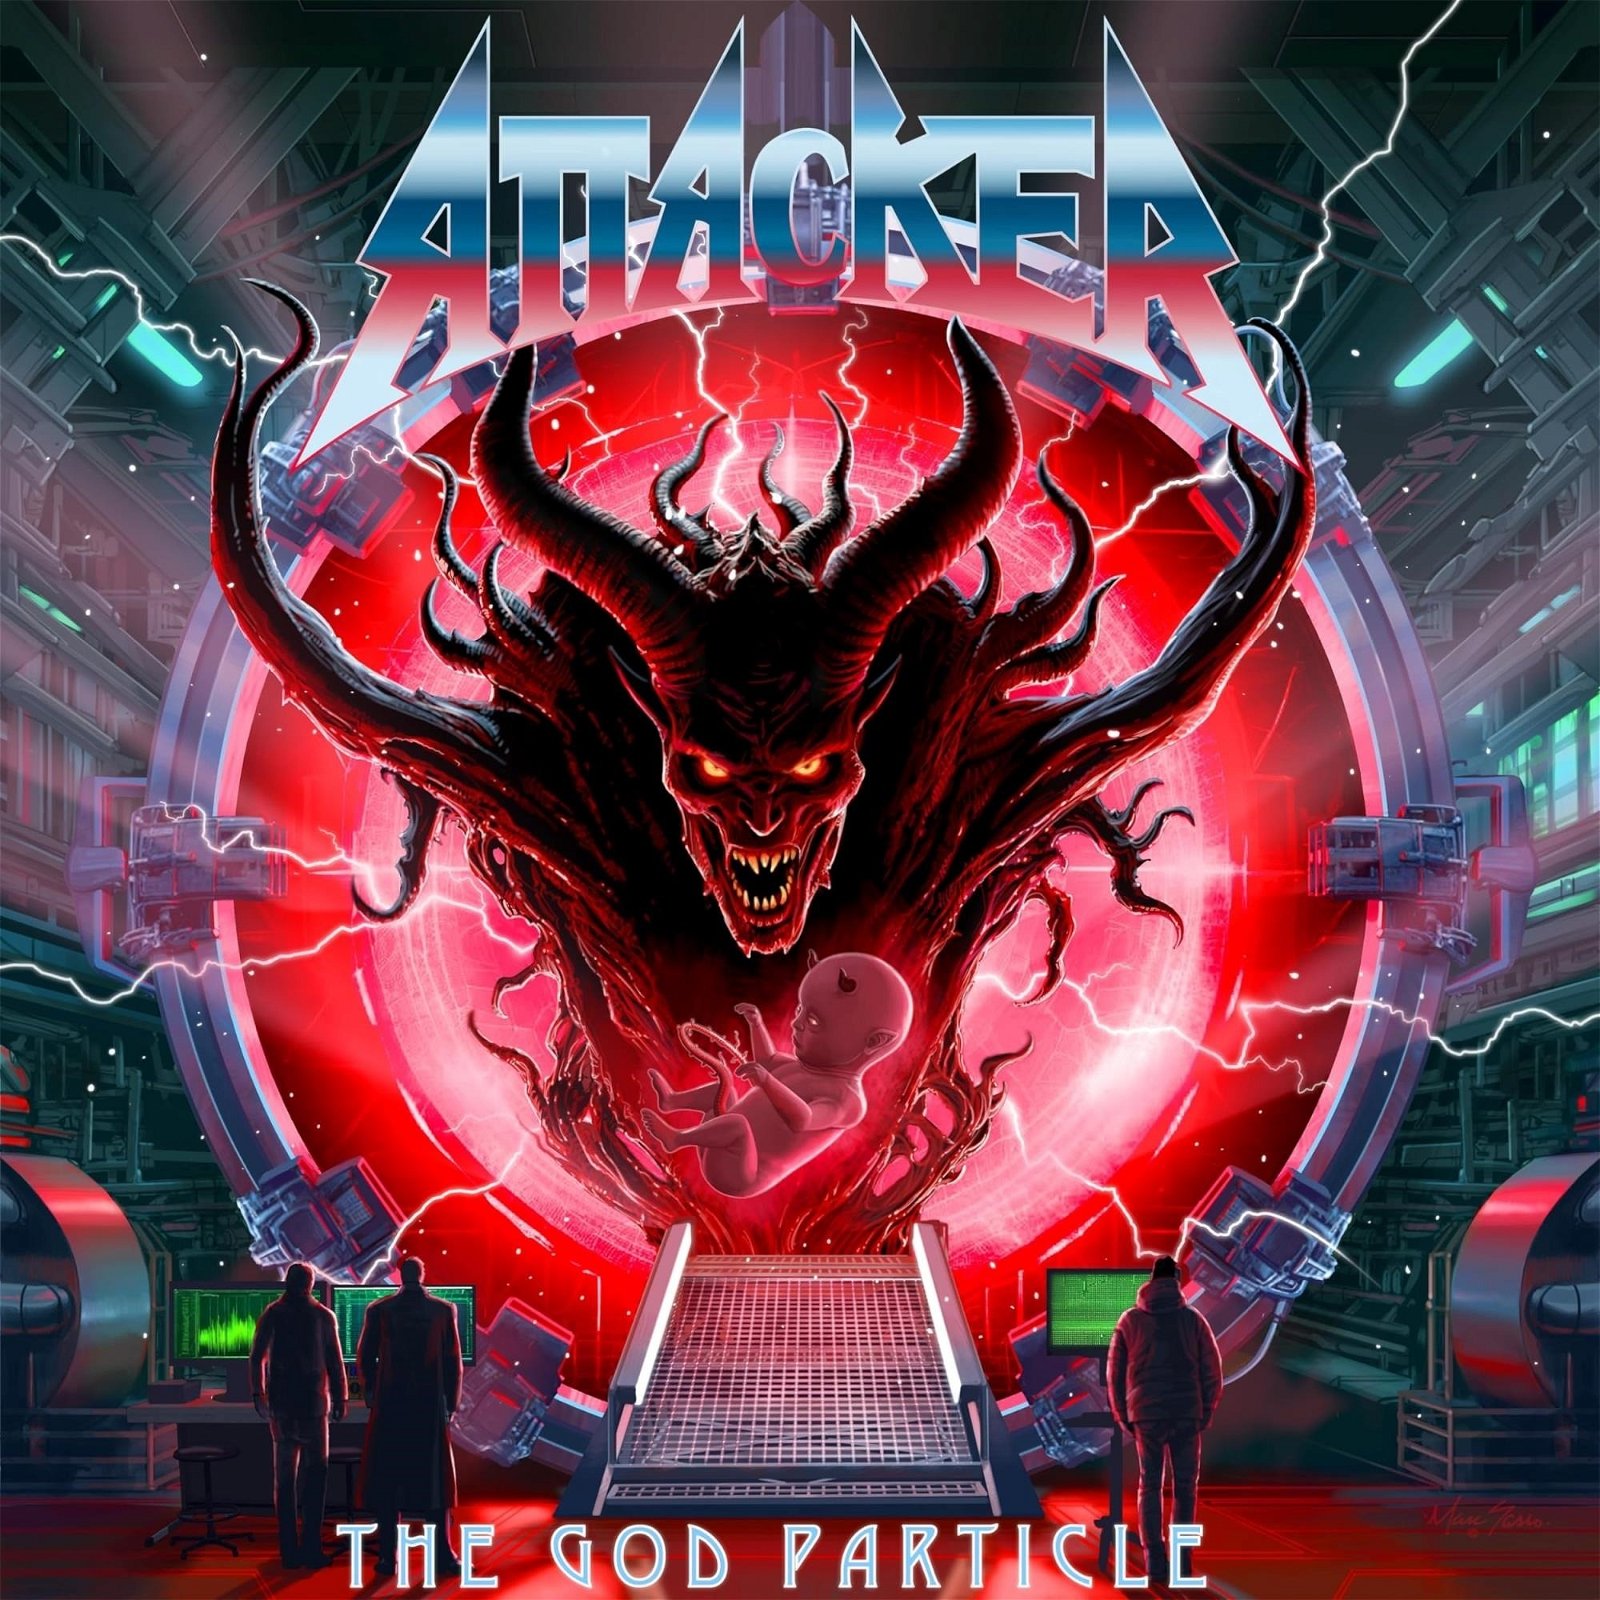 CD Shop - ATTACKER THE GOD PARTICLE